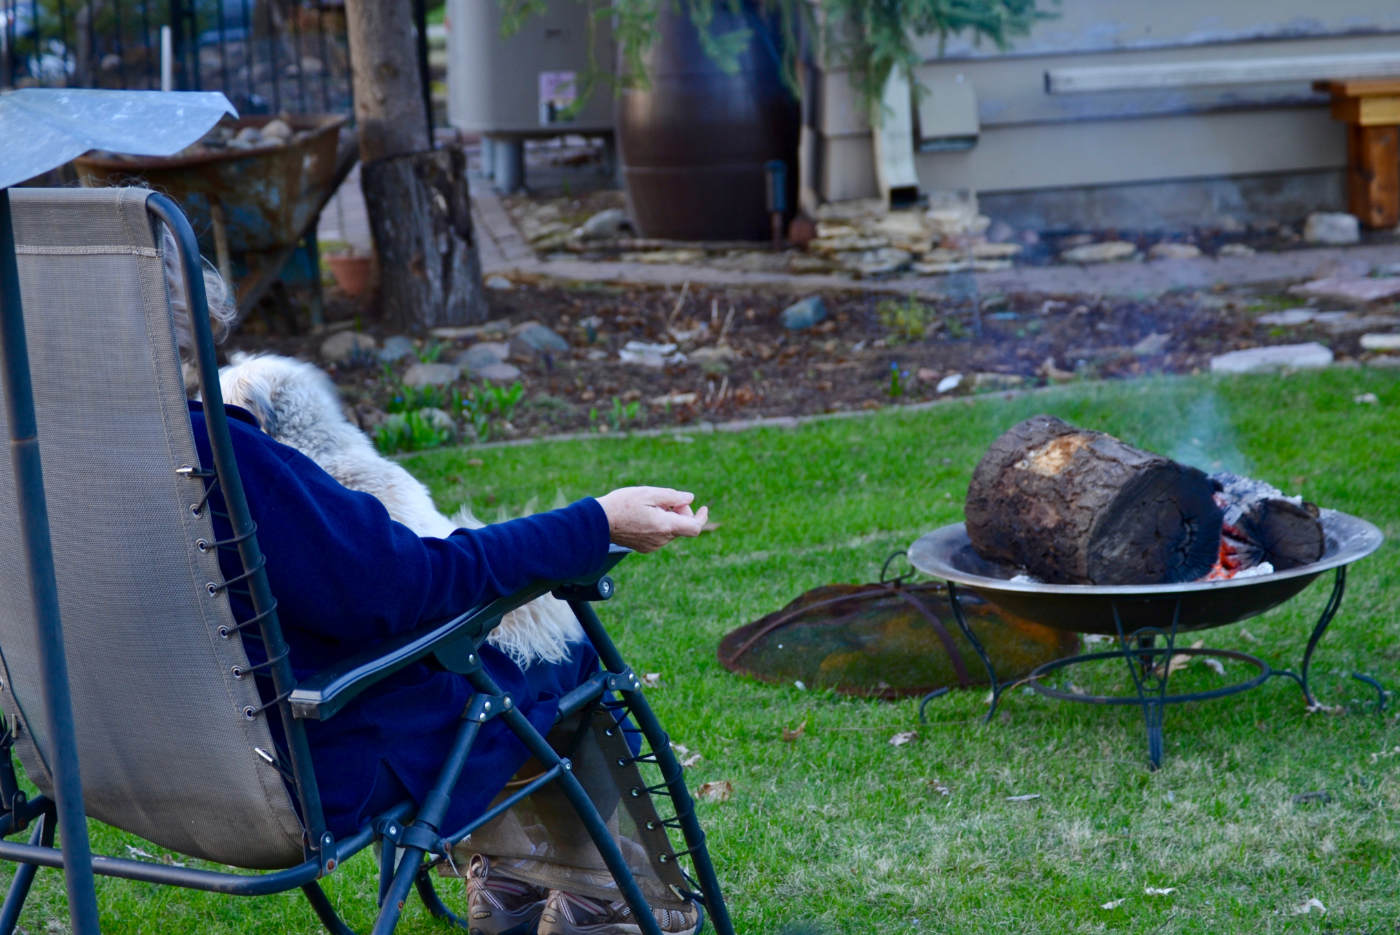 backside of person sitting in a lawn chair next to a fire pit with smoldering log sections